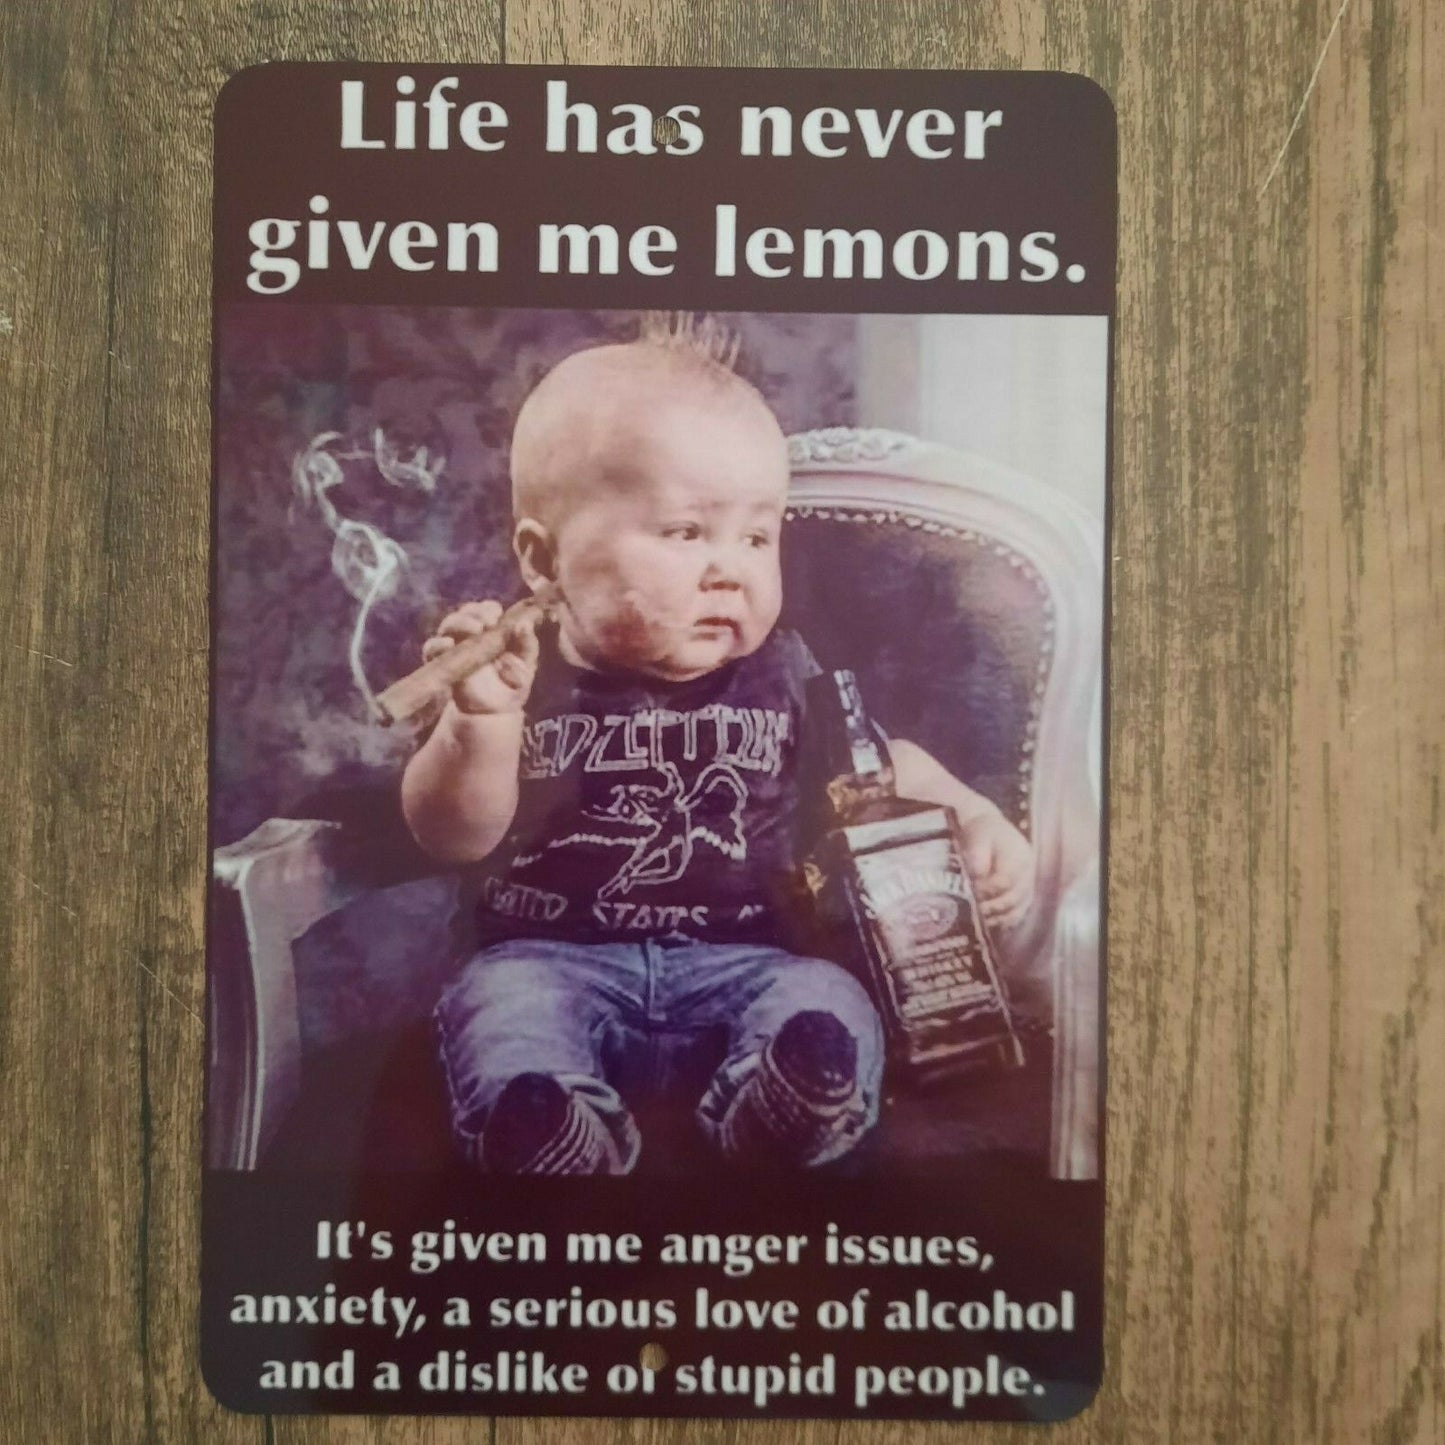 Life Has Never Given Me Lemons 8x12 Metal Wall Sign Phrase Misc Poster